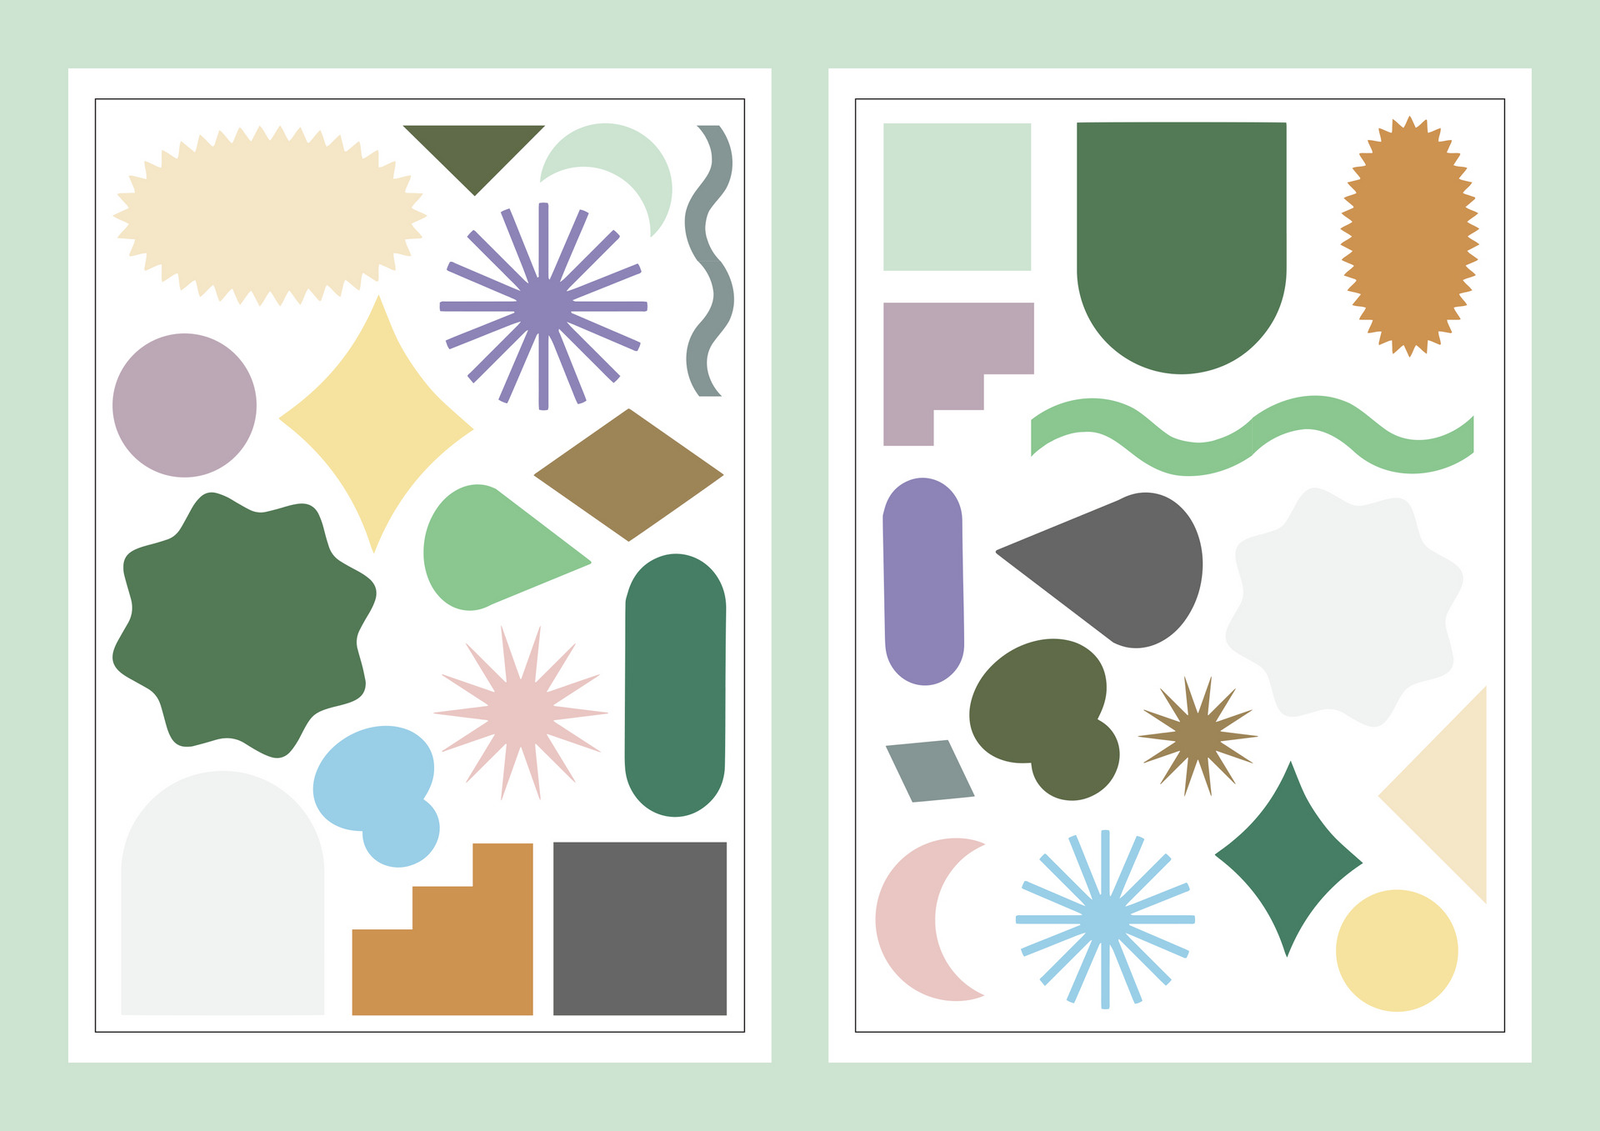 An image showing two custom Shape Play sticker sheets. The shapes are in mainly pale and pastel colors, and range in size.